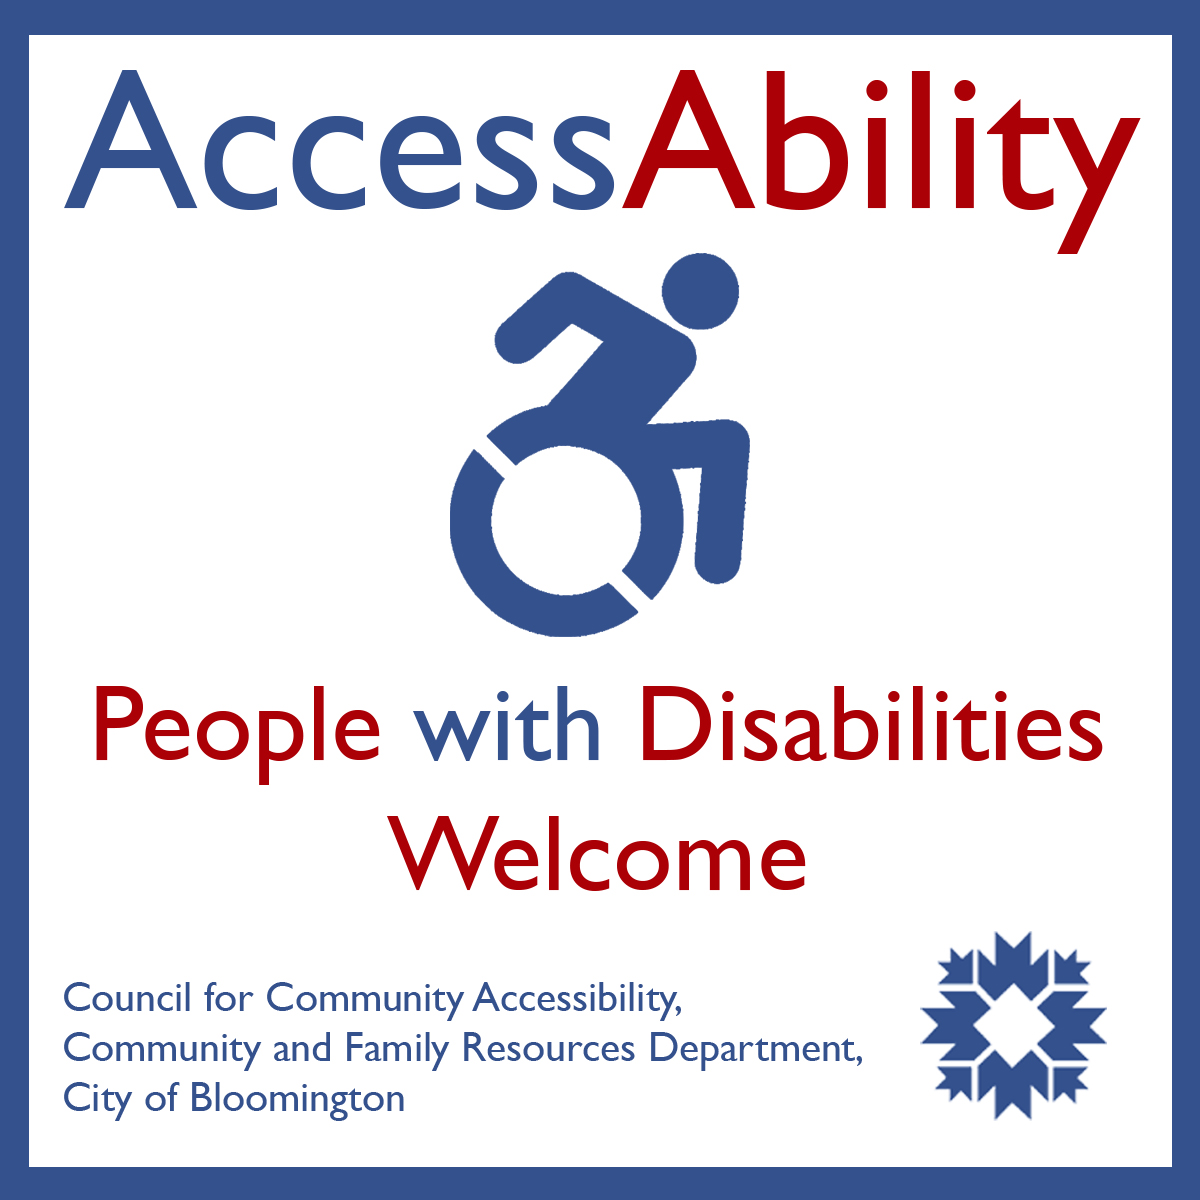 AccessAbility - People with Disabilities Welcome